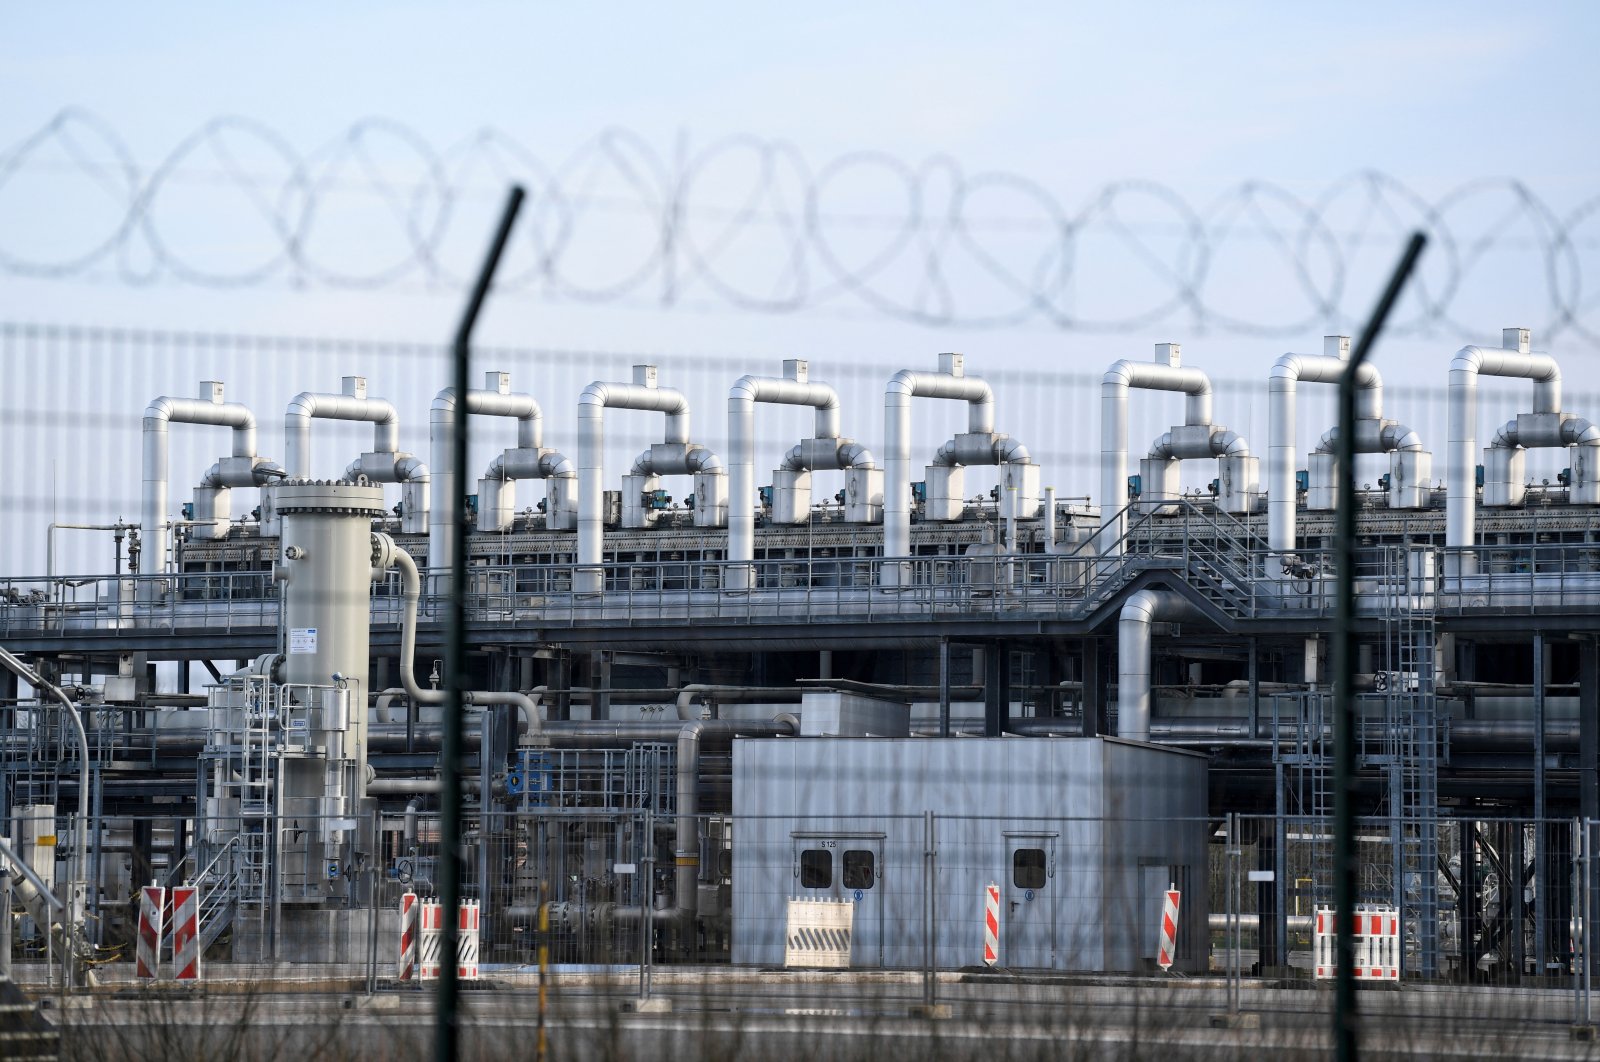 The Astora natural gas depot, which is the largest natural gas storage in Western Europe, is pictured in Rehden, Germany, March 16, 2022. Astora is part of the Gazprom Germania Group. (Reuters Photo)